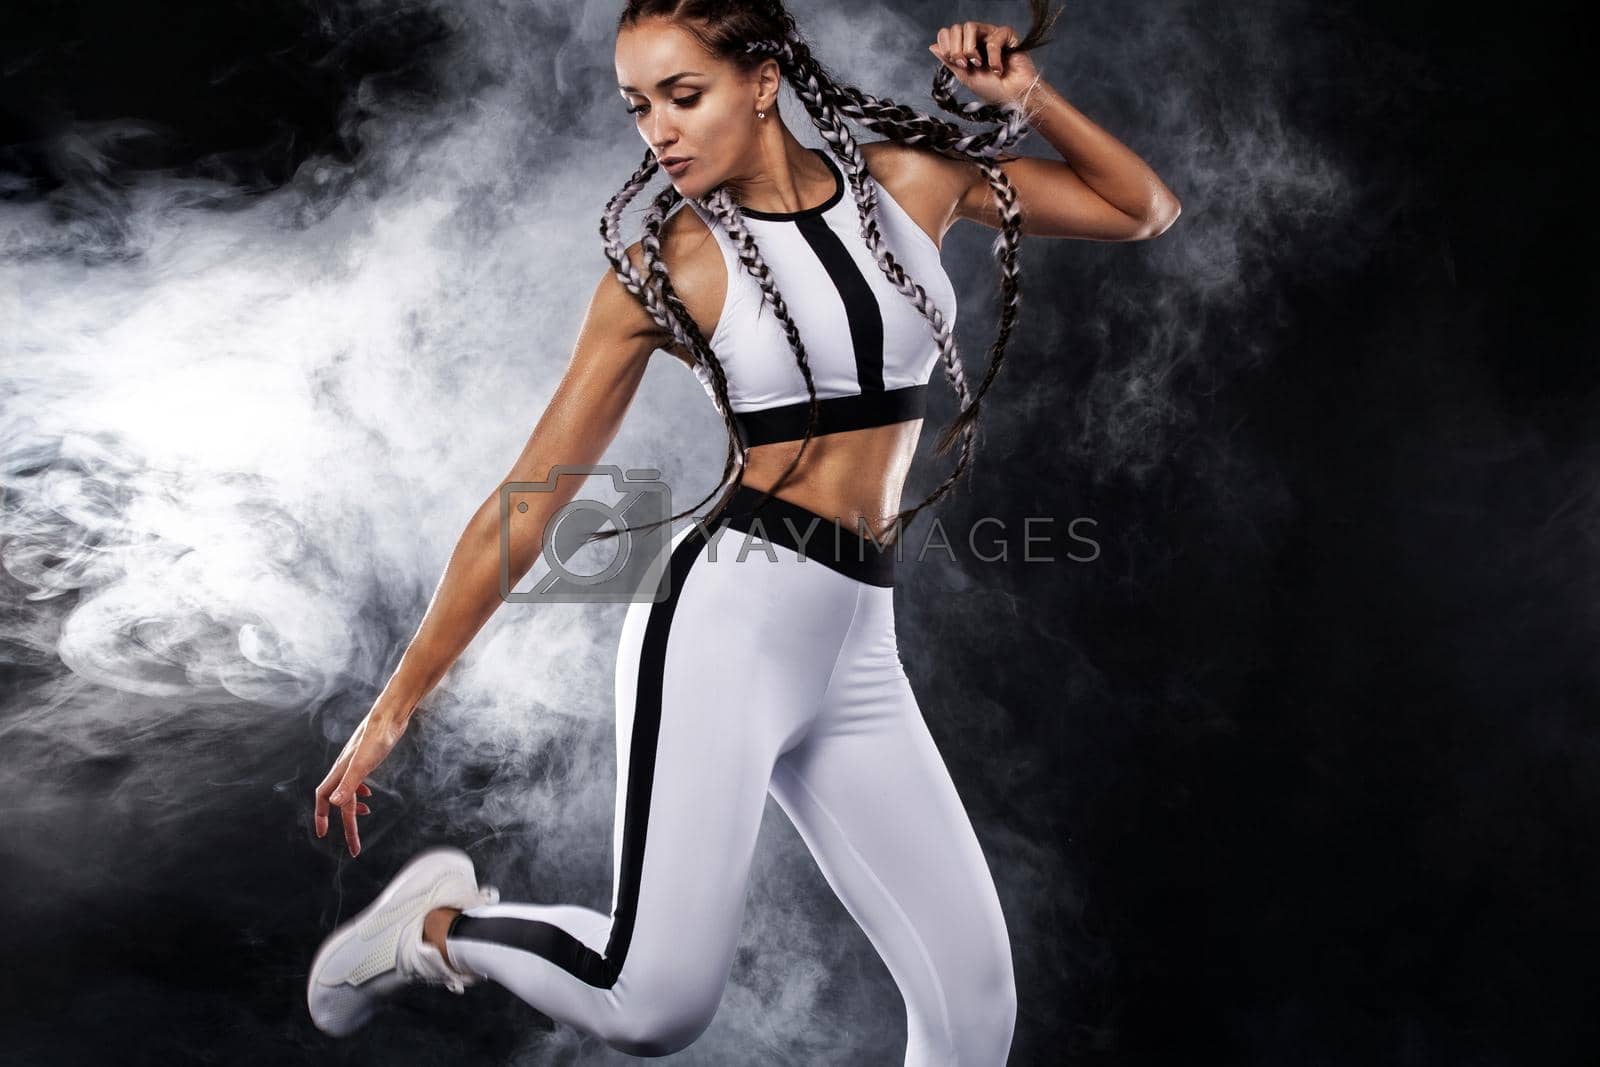 A Strong athletic, female runner on the black bacground wearing a tight, fitness outfit.